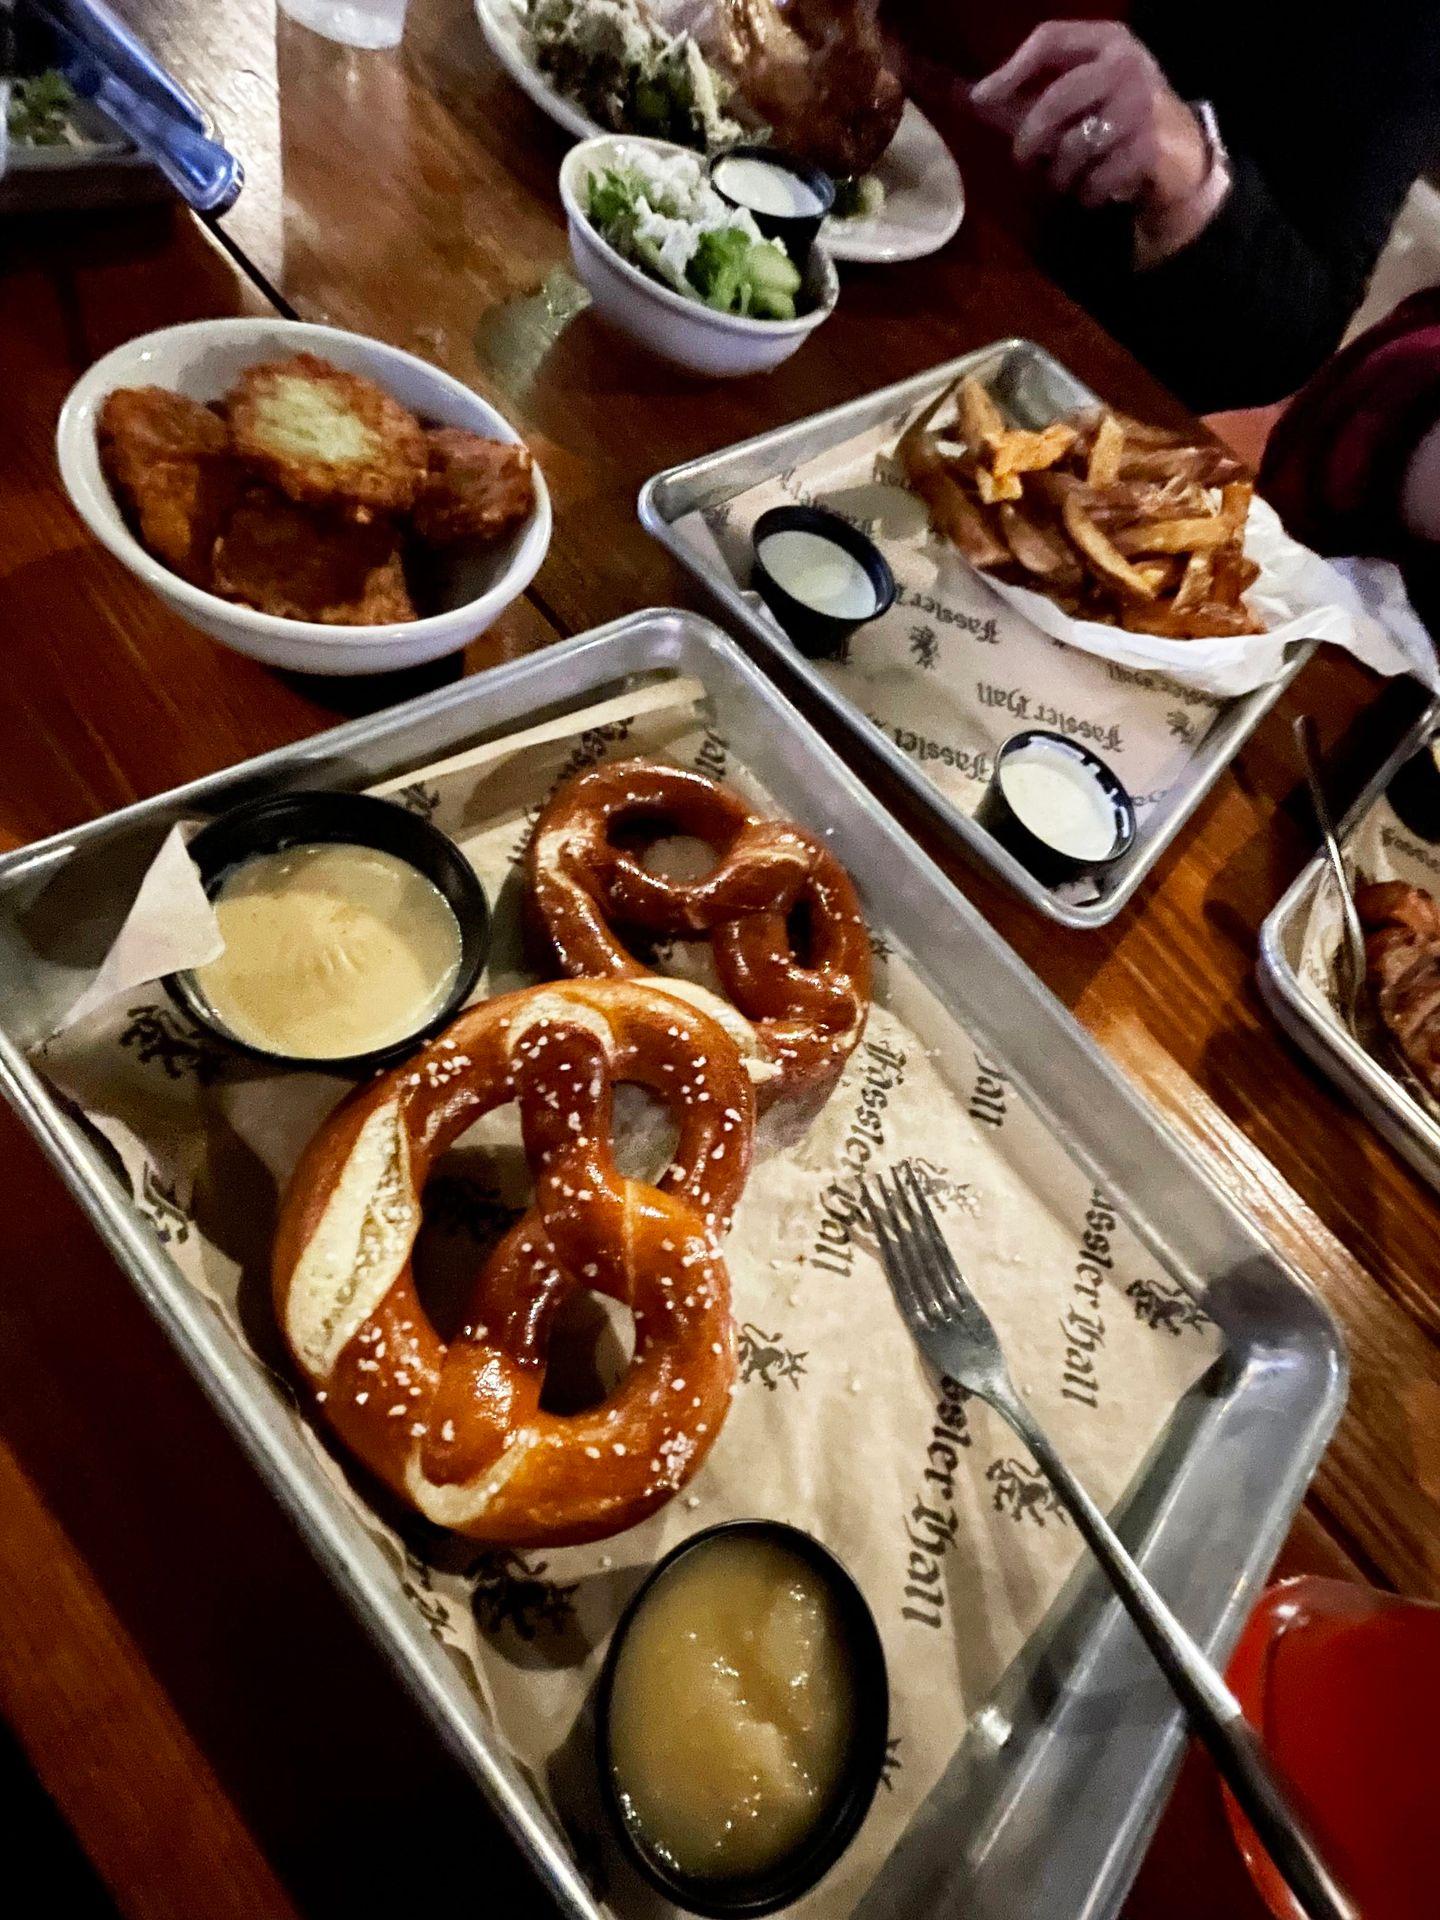 Plates of soft pretzels, fries and potato pancakes at Fassler Hall.